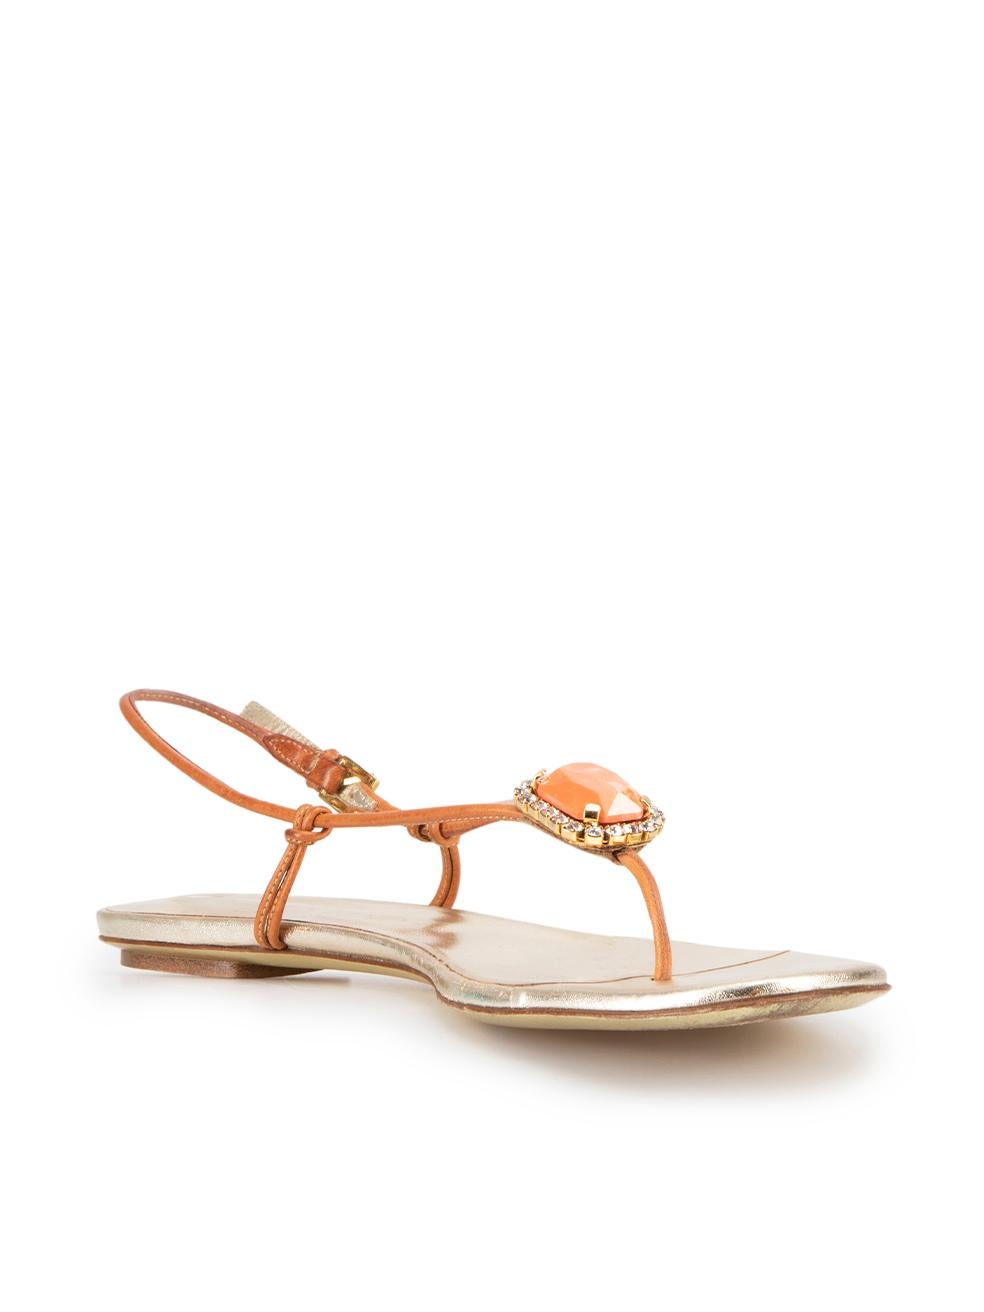 CONDITION is Good. Minor wear to sandals is evident. Light wear to the leather straps, footbeds and coral embellishment with discoloured marks on this used Valentino designer resale item.
  
Details
Brown
Leather
Thong sandals
Open toe
Flat